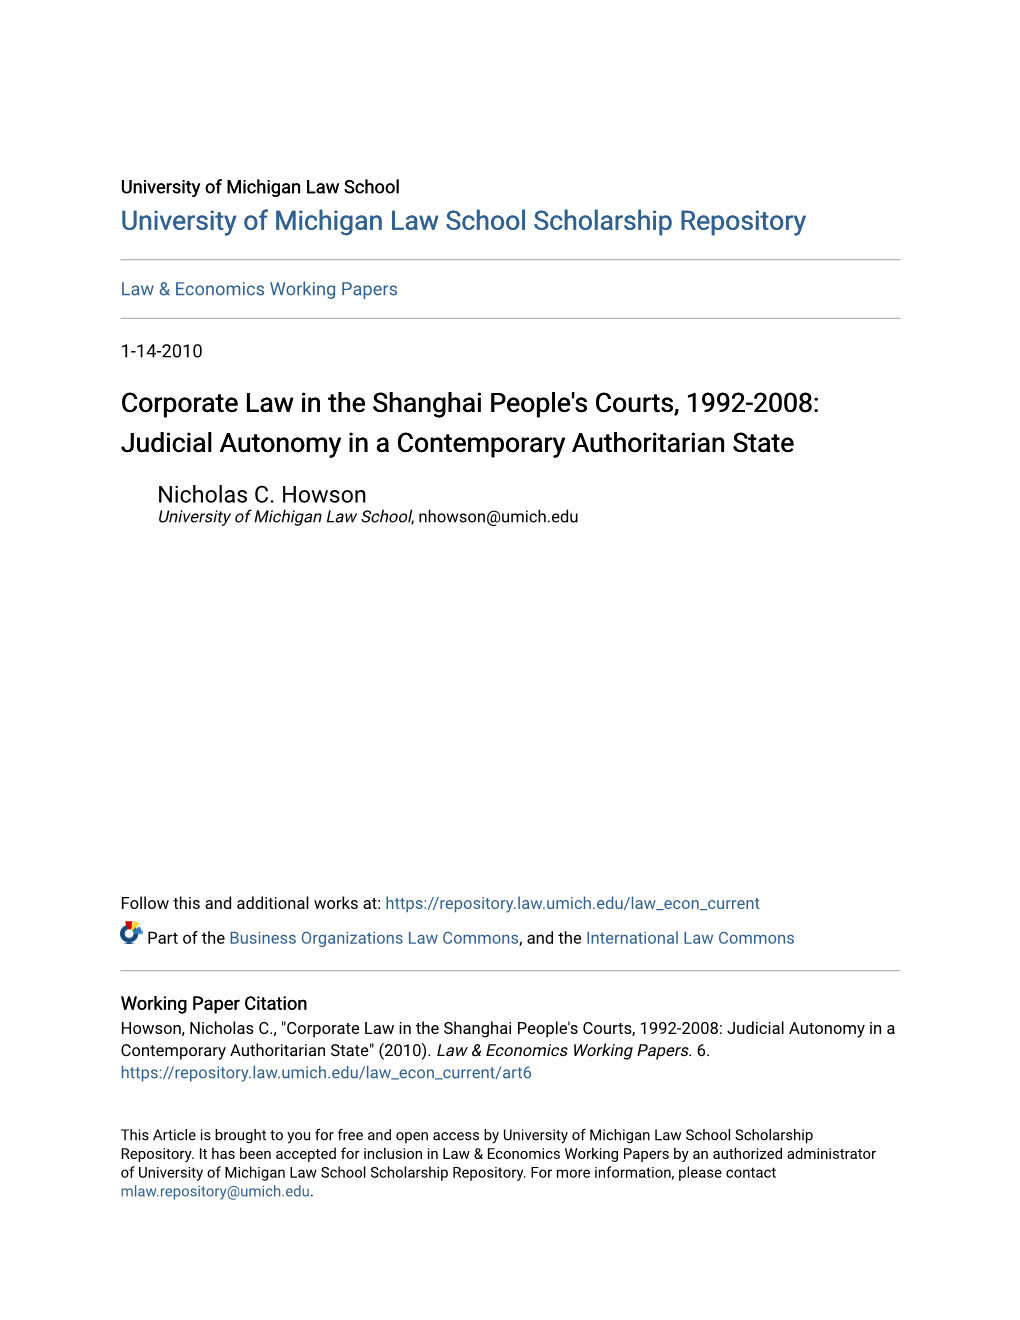 Corporate Law in the Shanghai People's Courts, 1992-2008: Judicial Autonomy in a Contemporary Authoritarian State